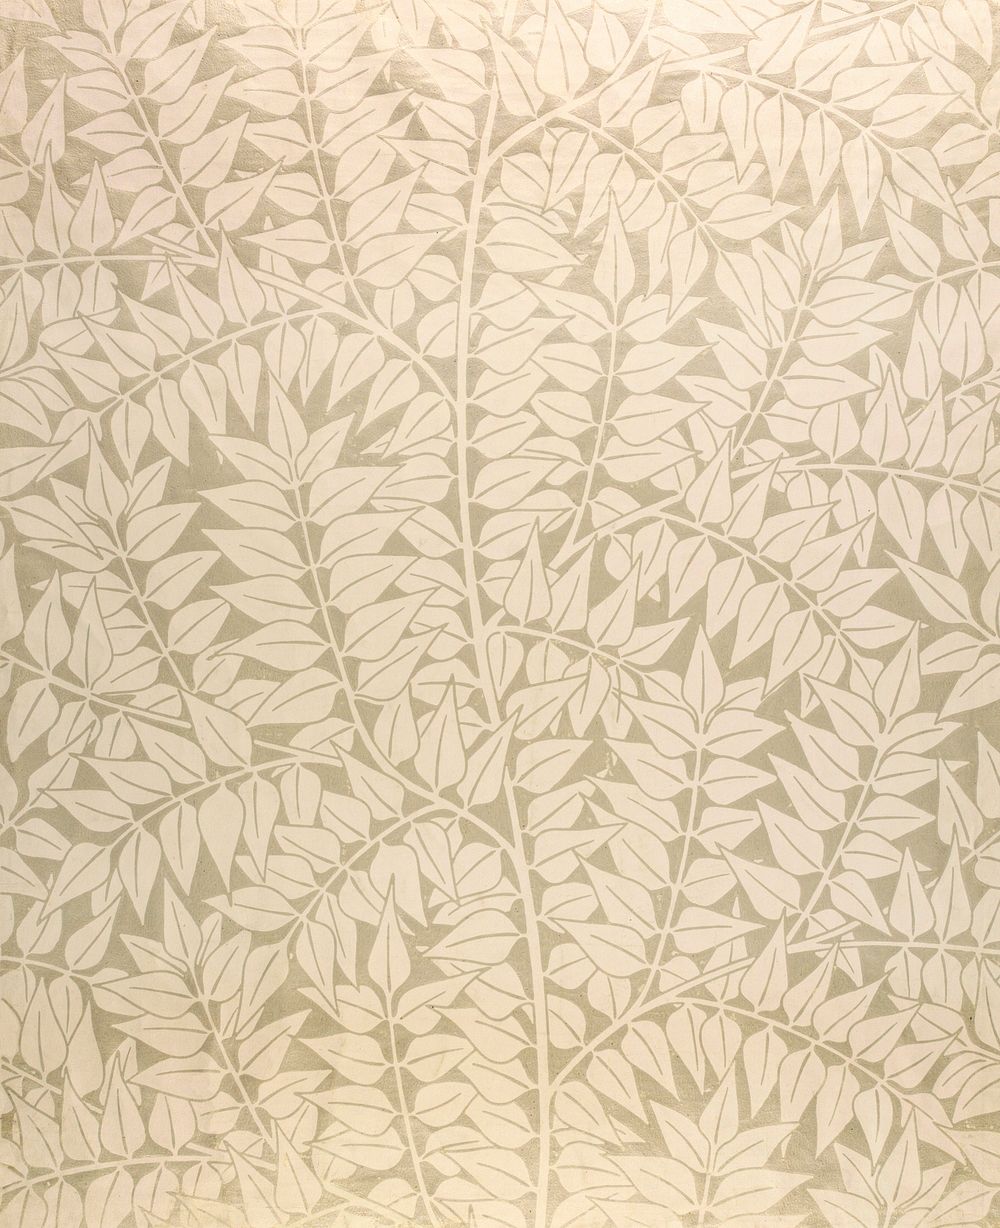 William Morris's Branch (1872) famous pattern. Original from The Smithsonian Institution. Digitally enhanced by rawpixel.